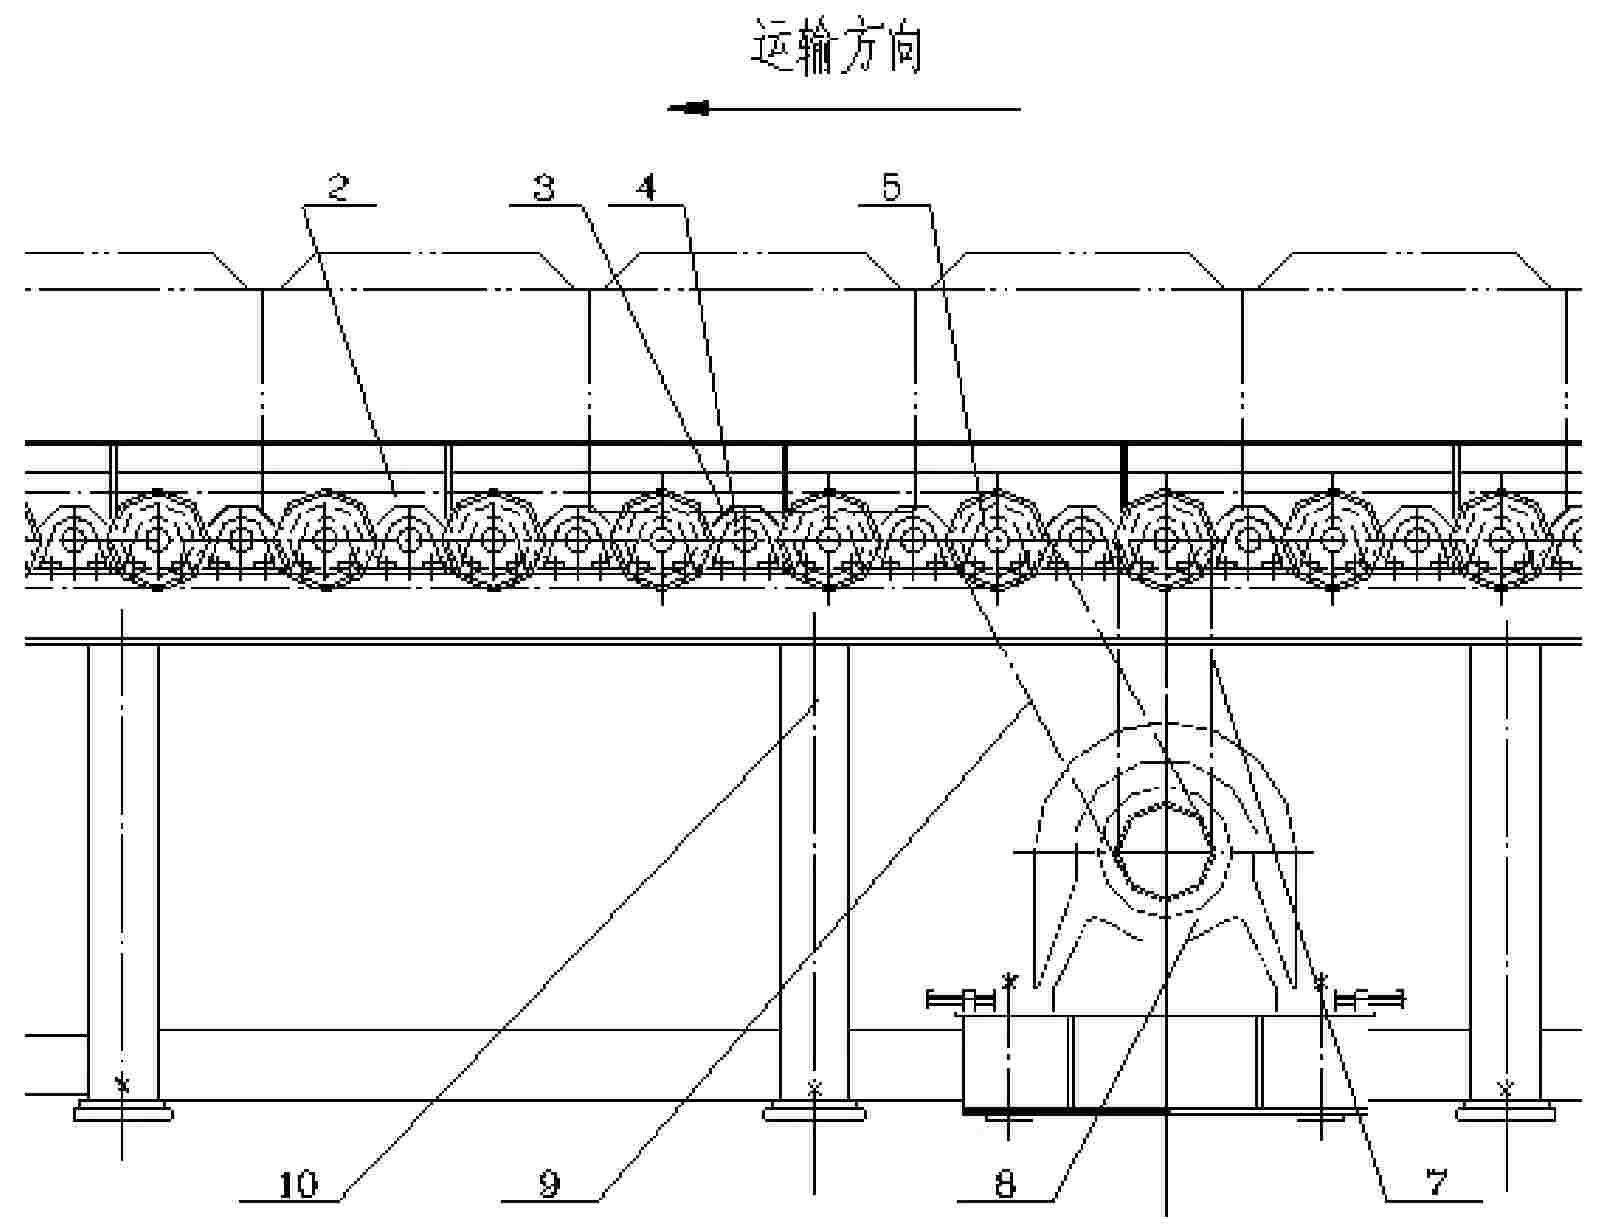 Double-roller bed conveyor device